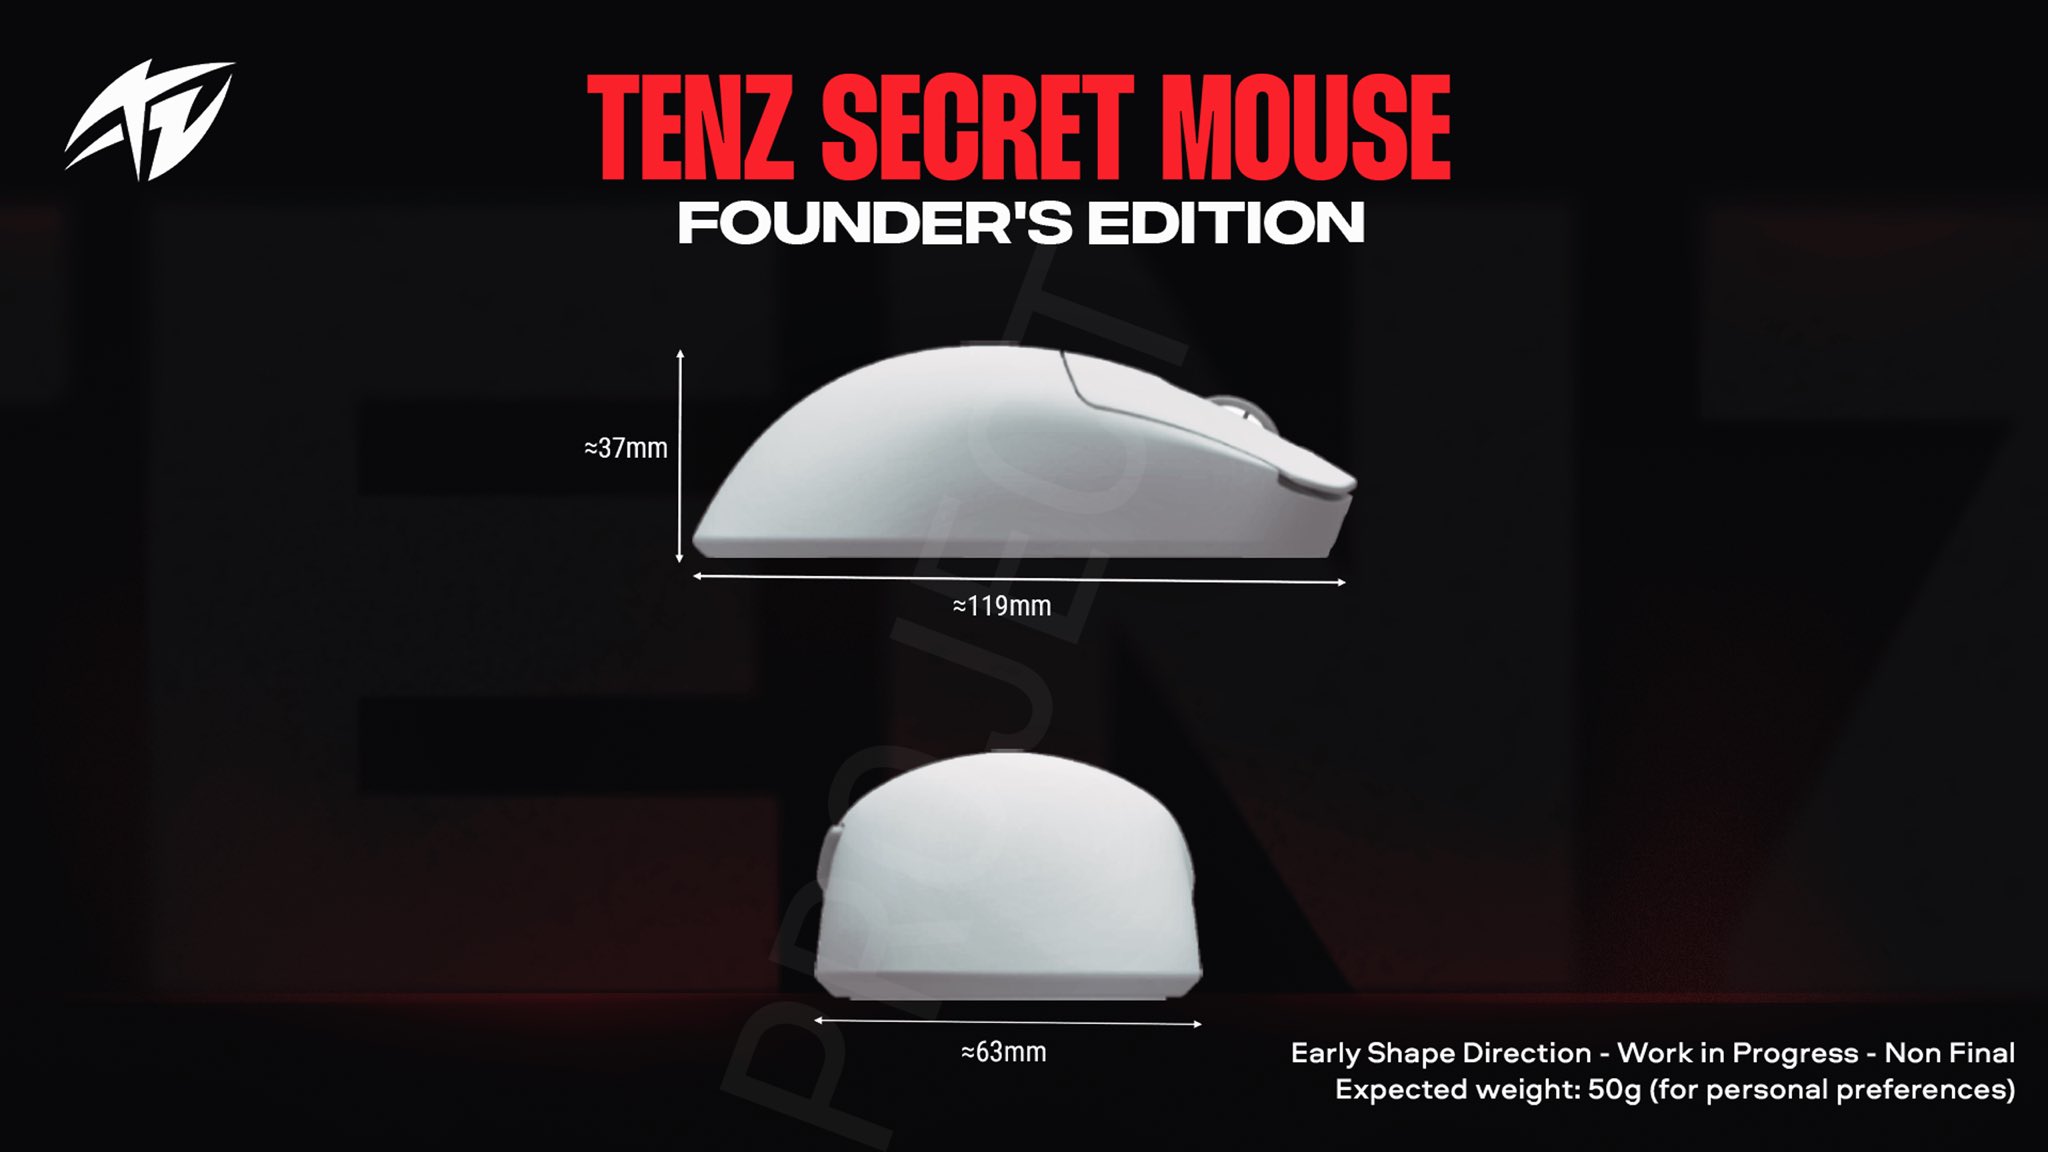 "Super early prototype" of TenZ's mouse